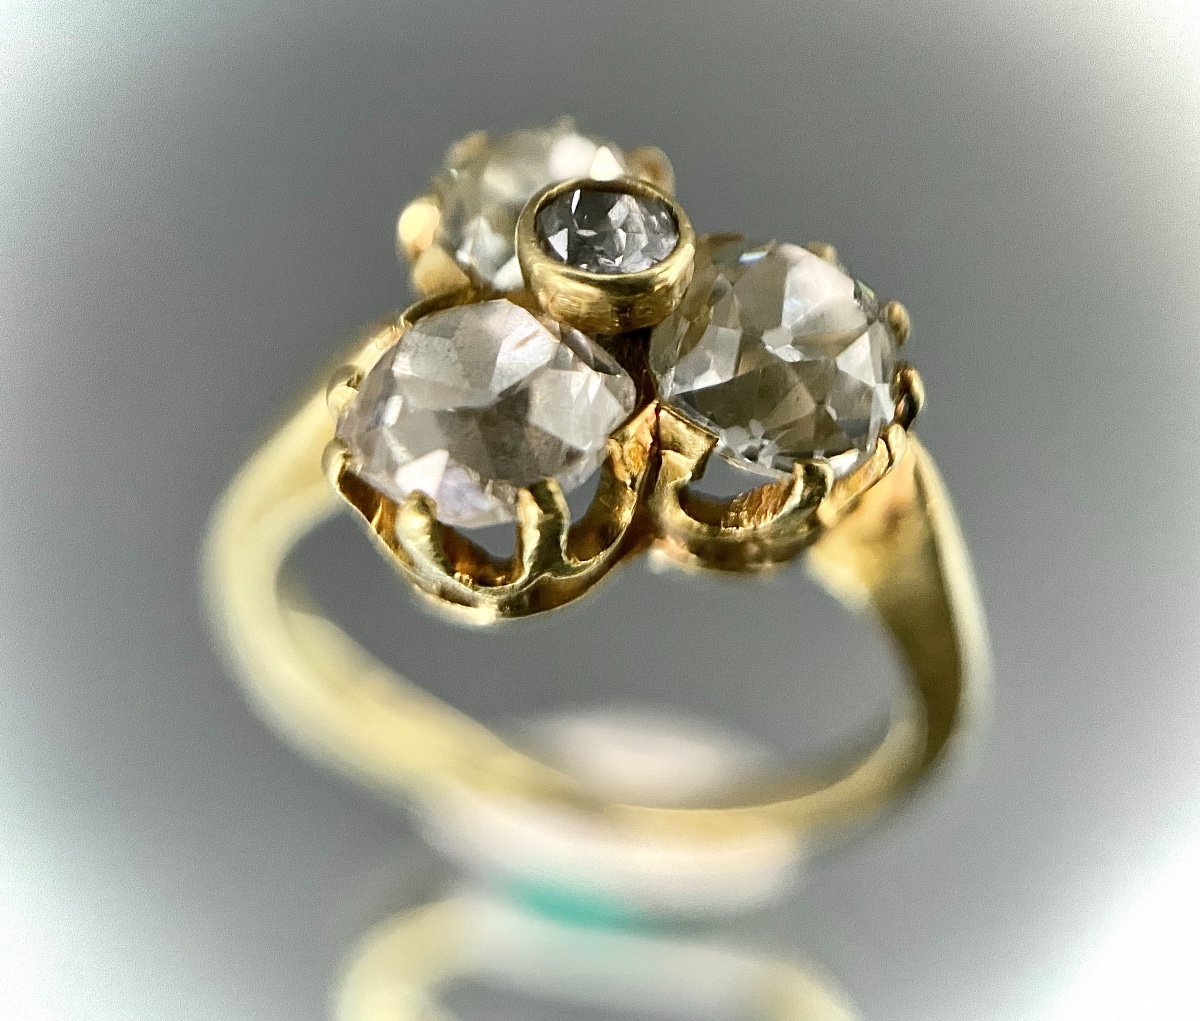 Napoleon III Ring In 18 Carat Yellow Gold Set With 3 Old Diamonds Of 0.60 Carat Each